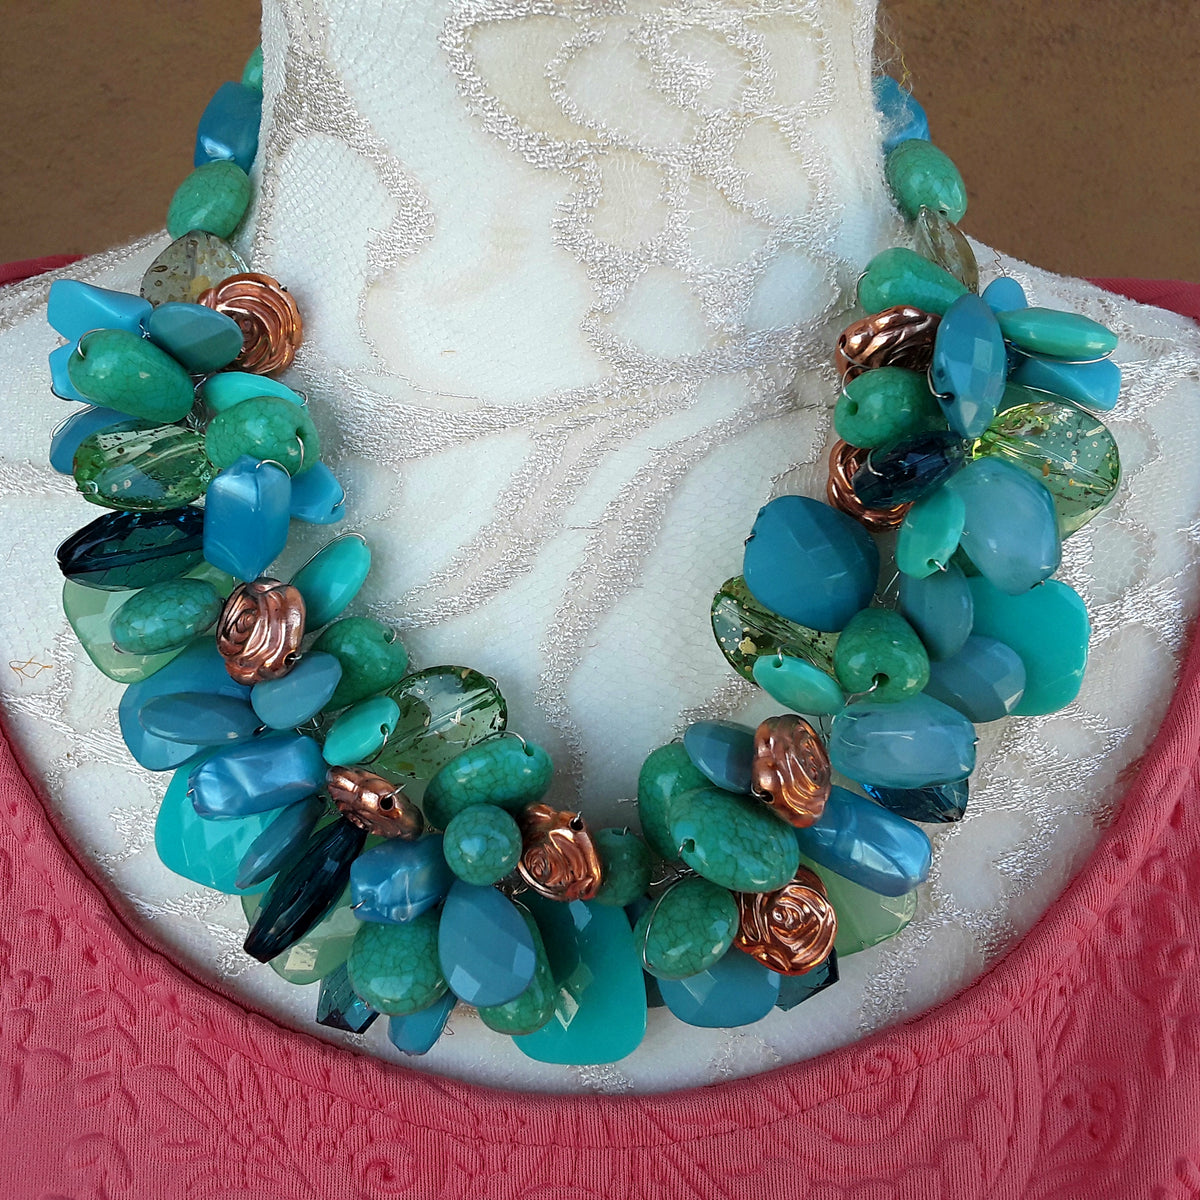 Unique Chunky Turquoise Statement Necklace, Colorful Collar, Mother of the Bride Collar